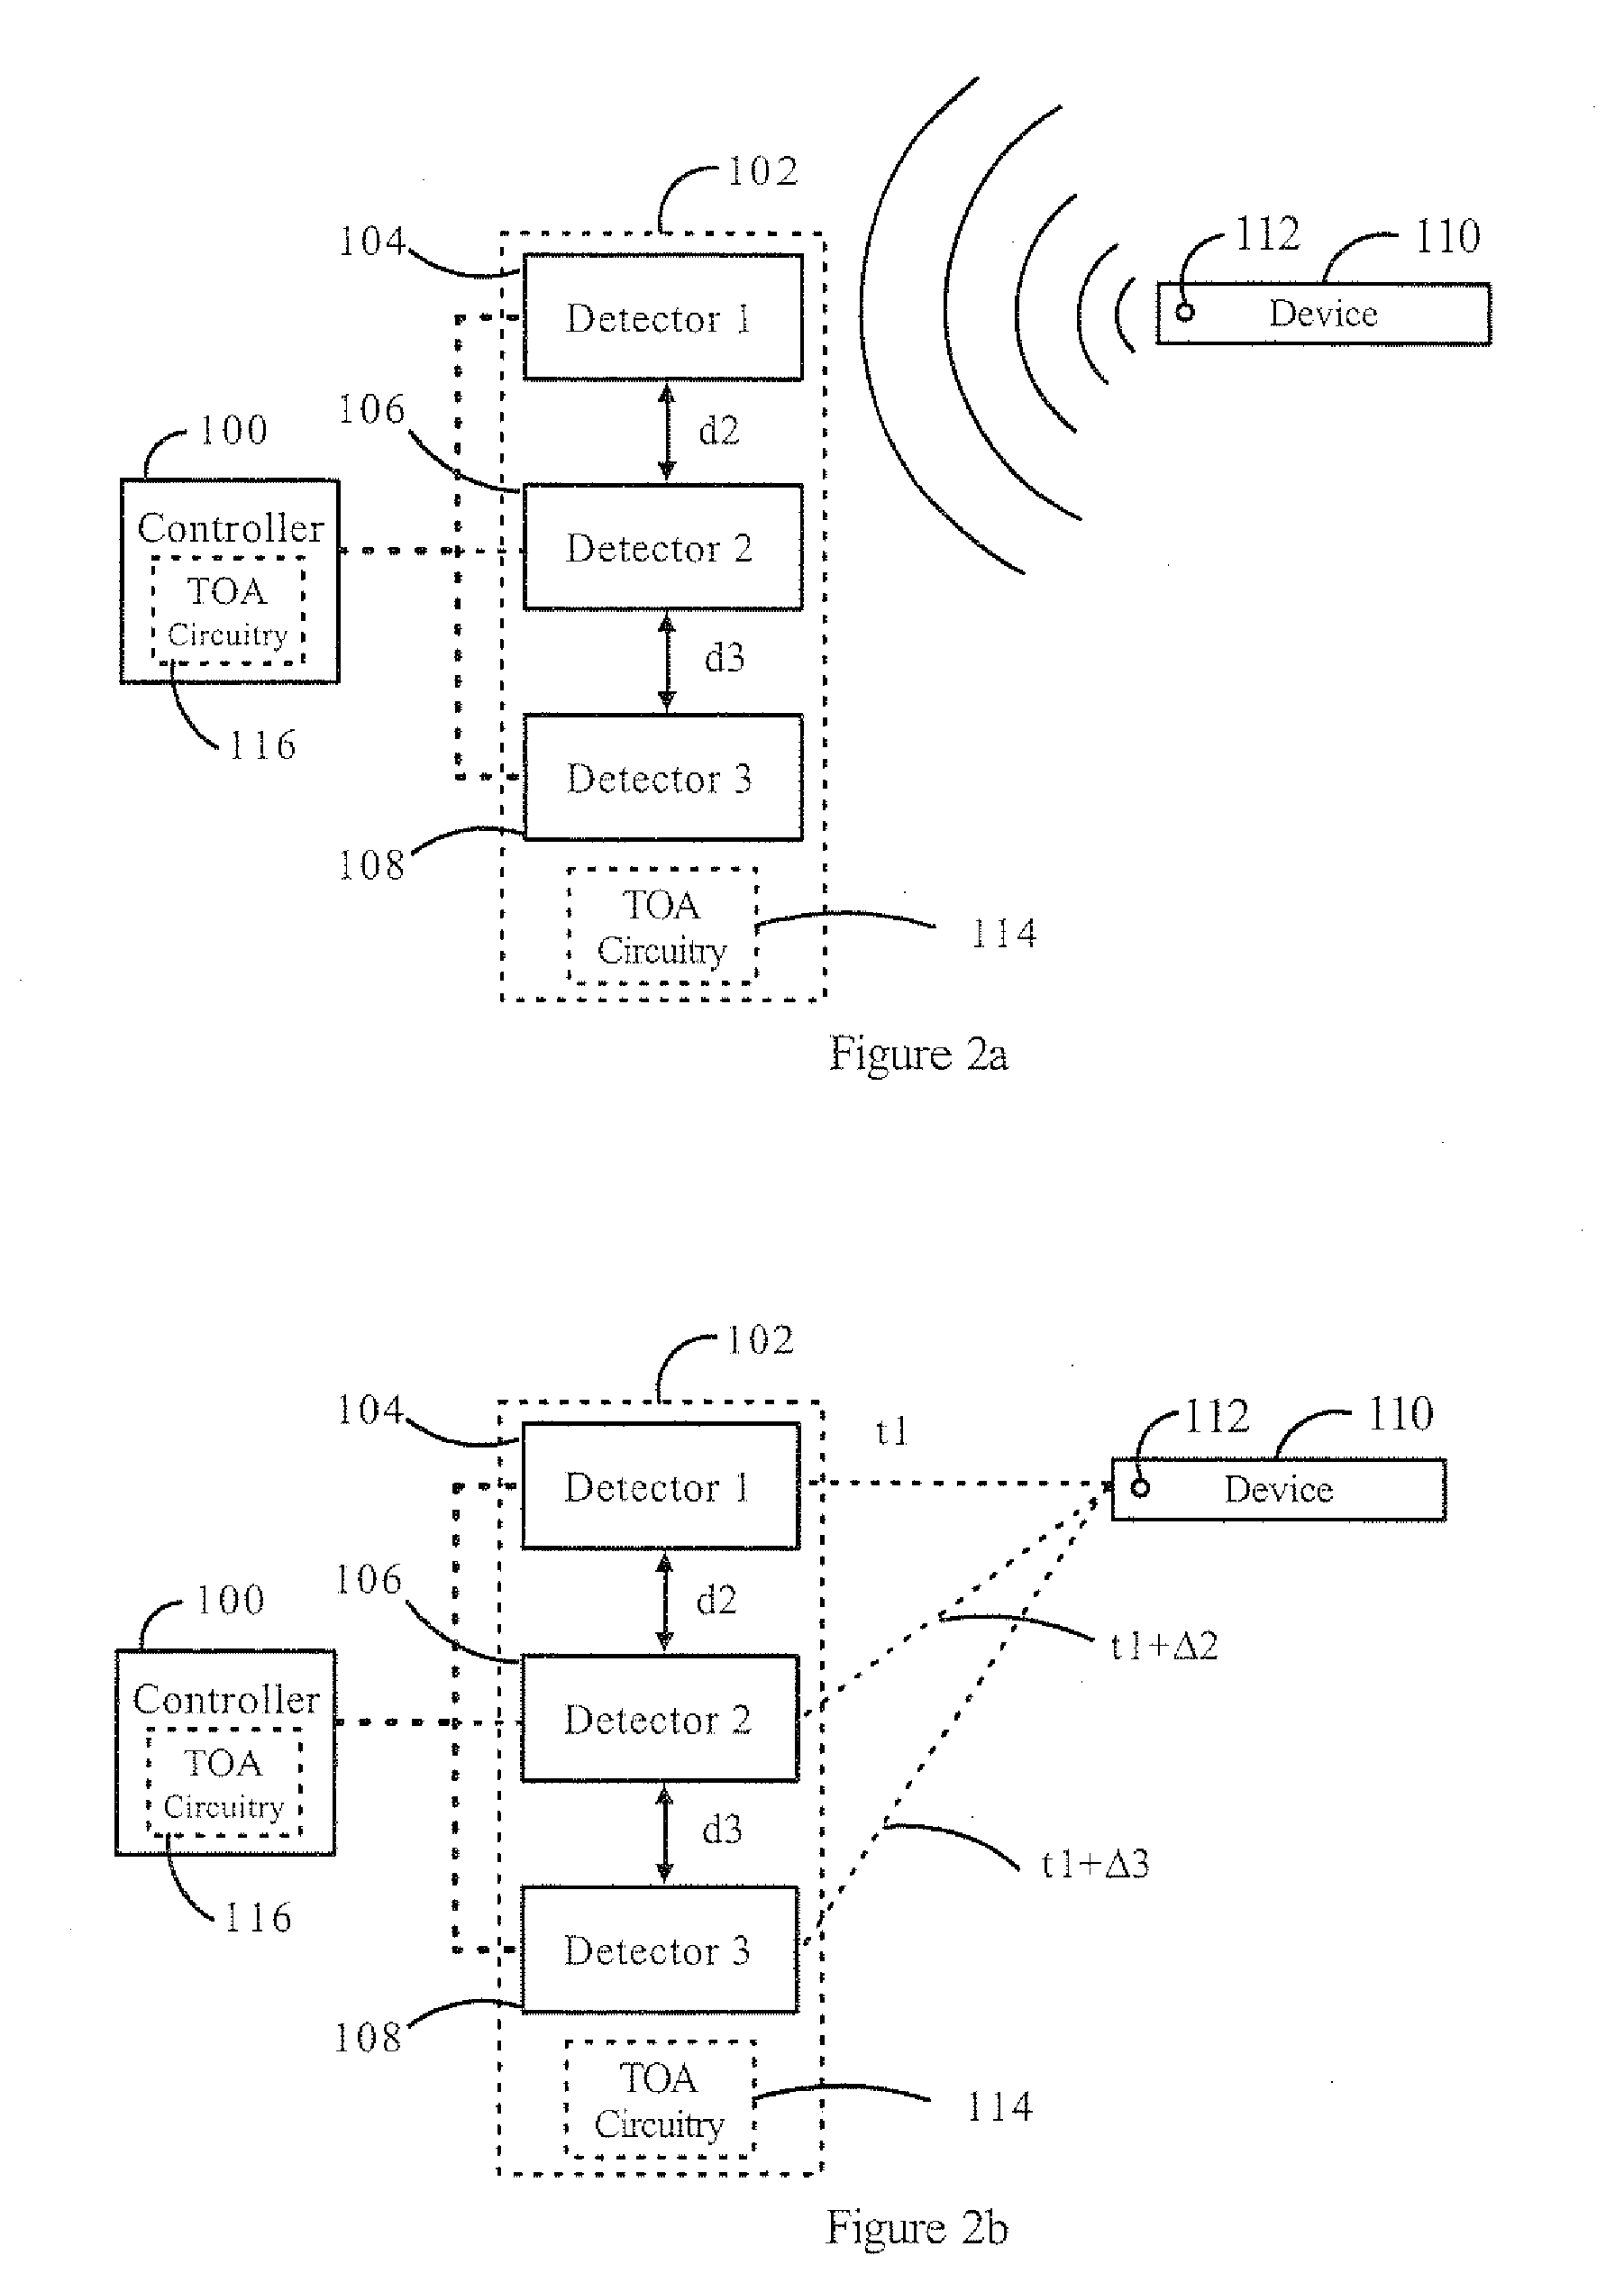 System and method for automatic determination of the physical location of data center equipment